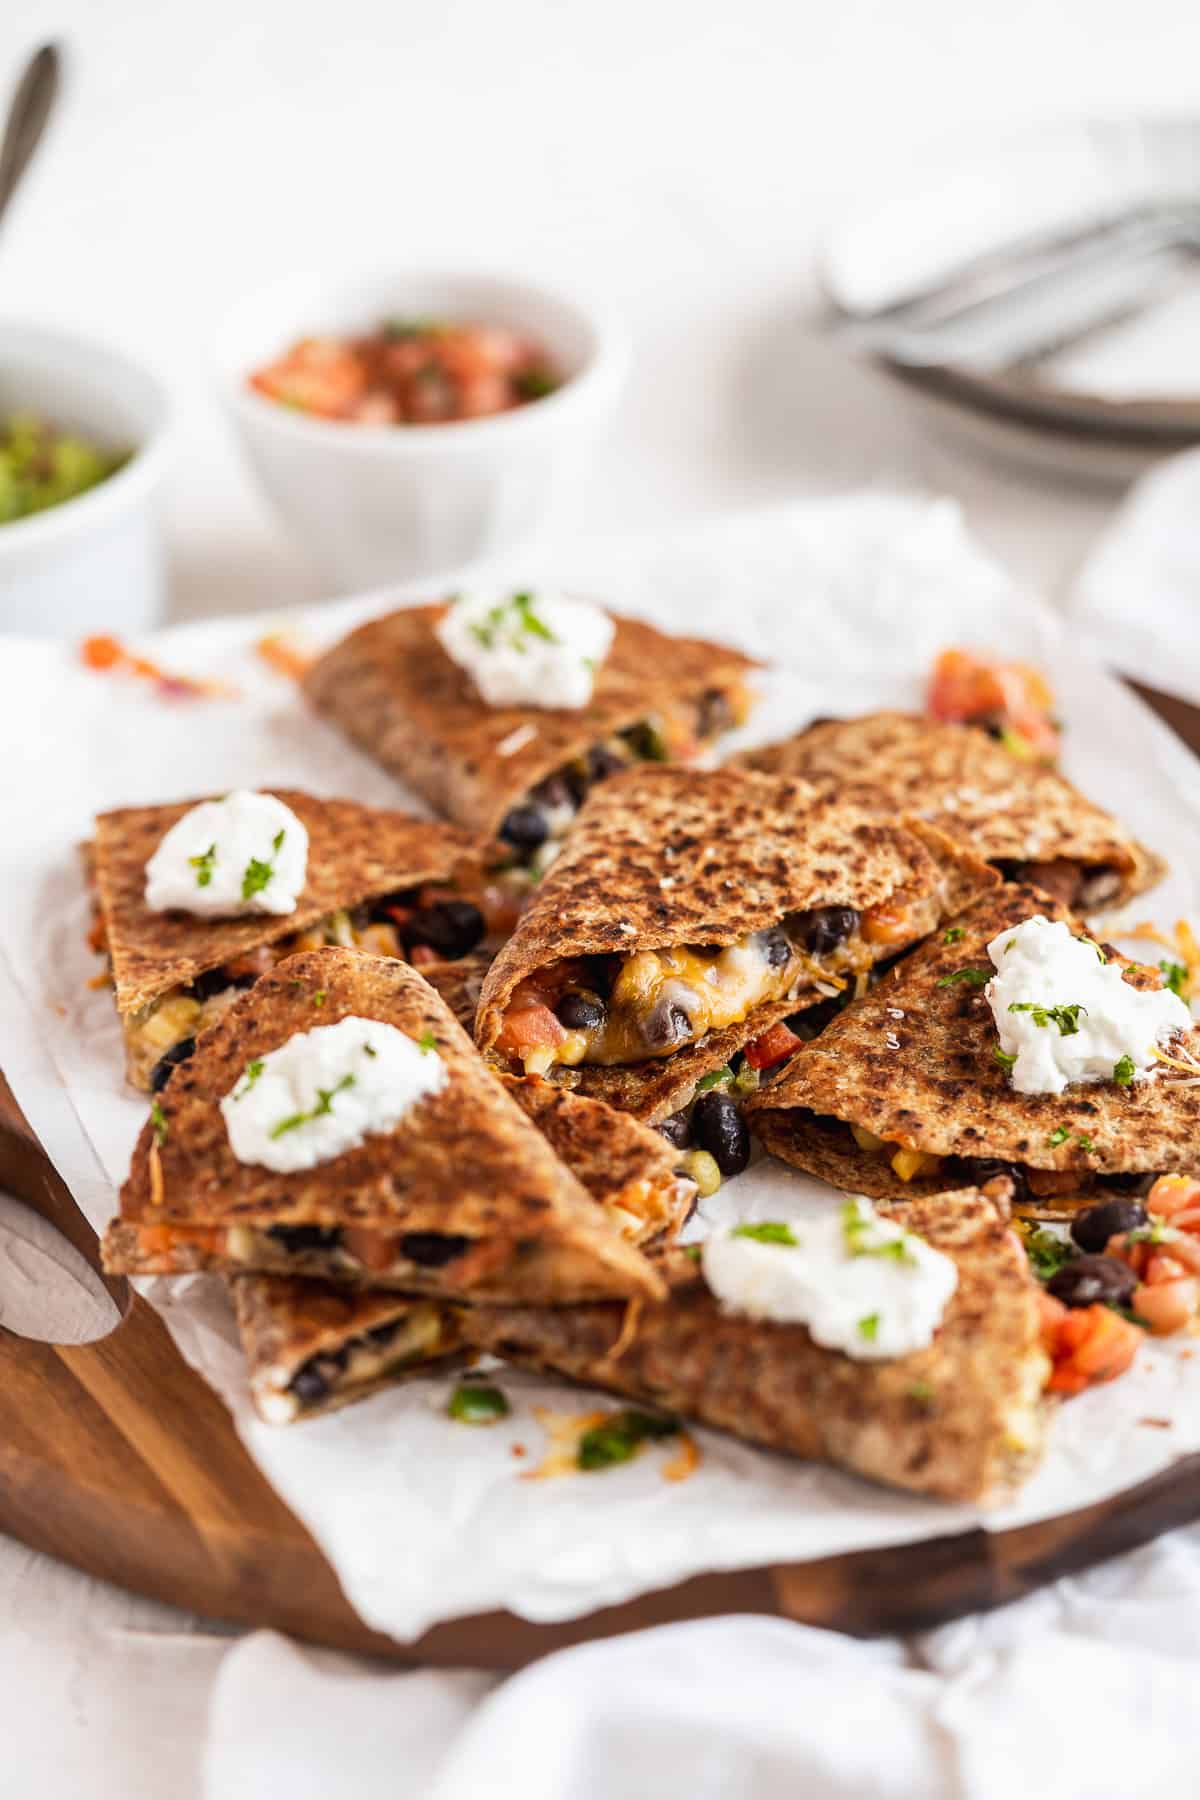 Overhead photo of Southwest Quesadilla triangles ready to be enjoyed.  They are mounded on parchment paper on a wooden tray.  Several of the triangles are topped with a dollop of greek yogurt.  